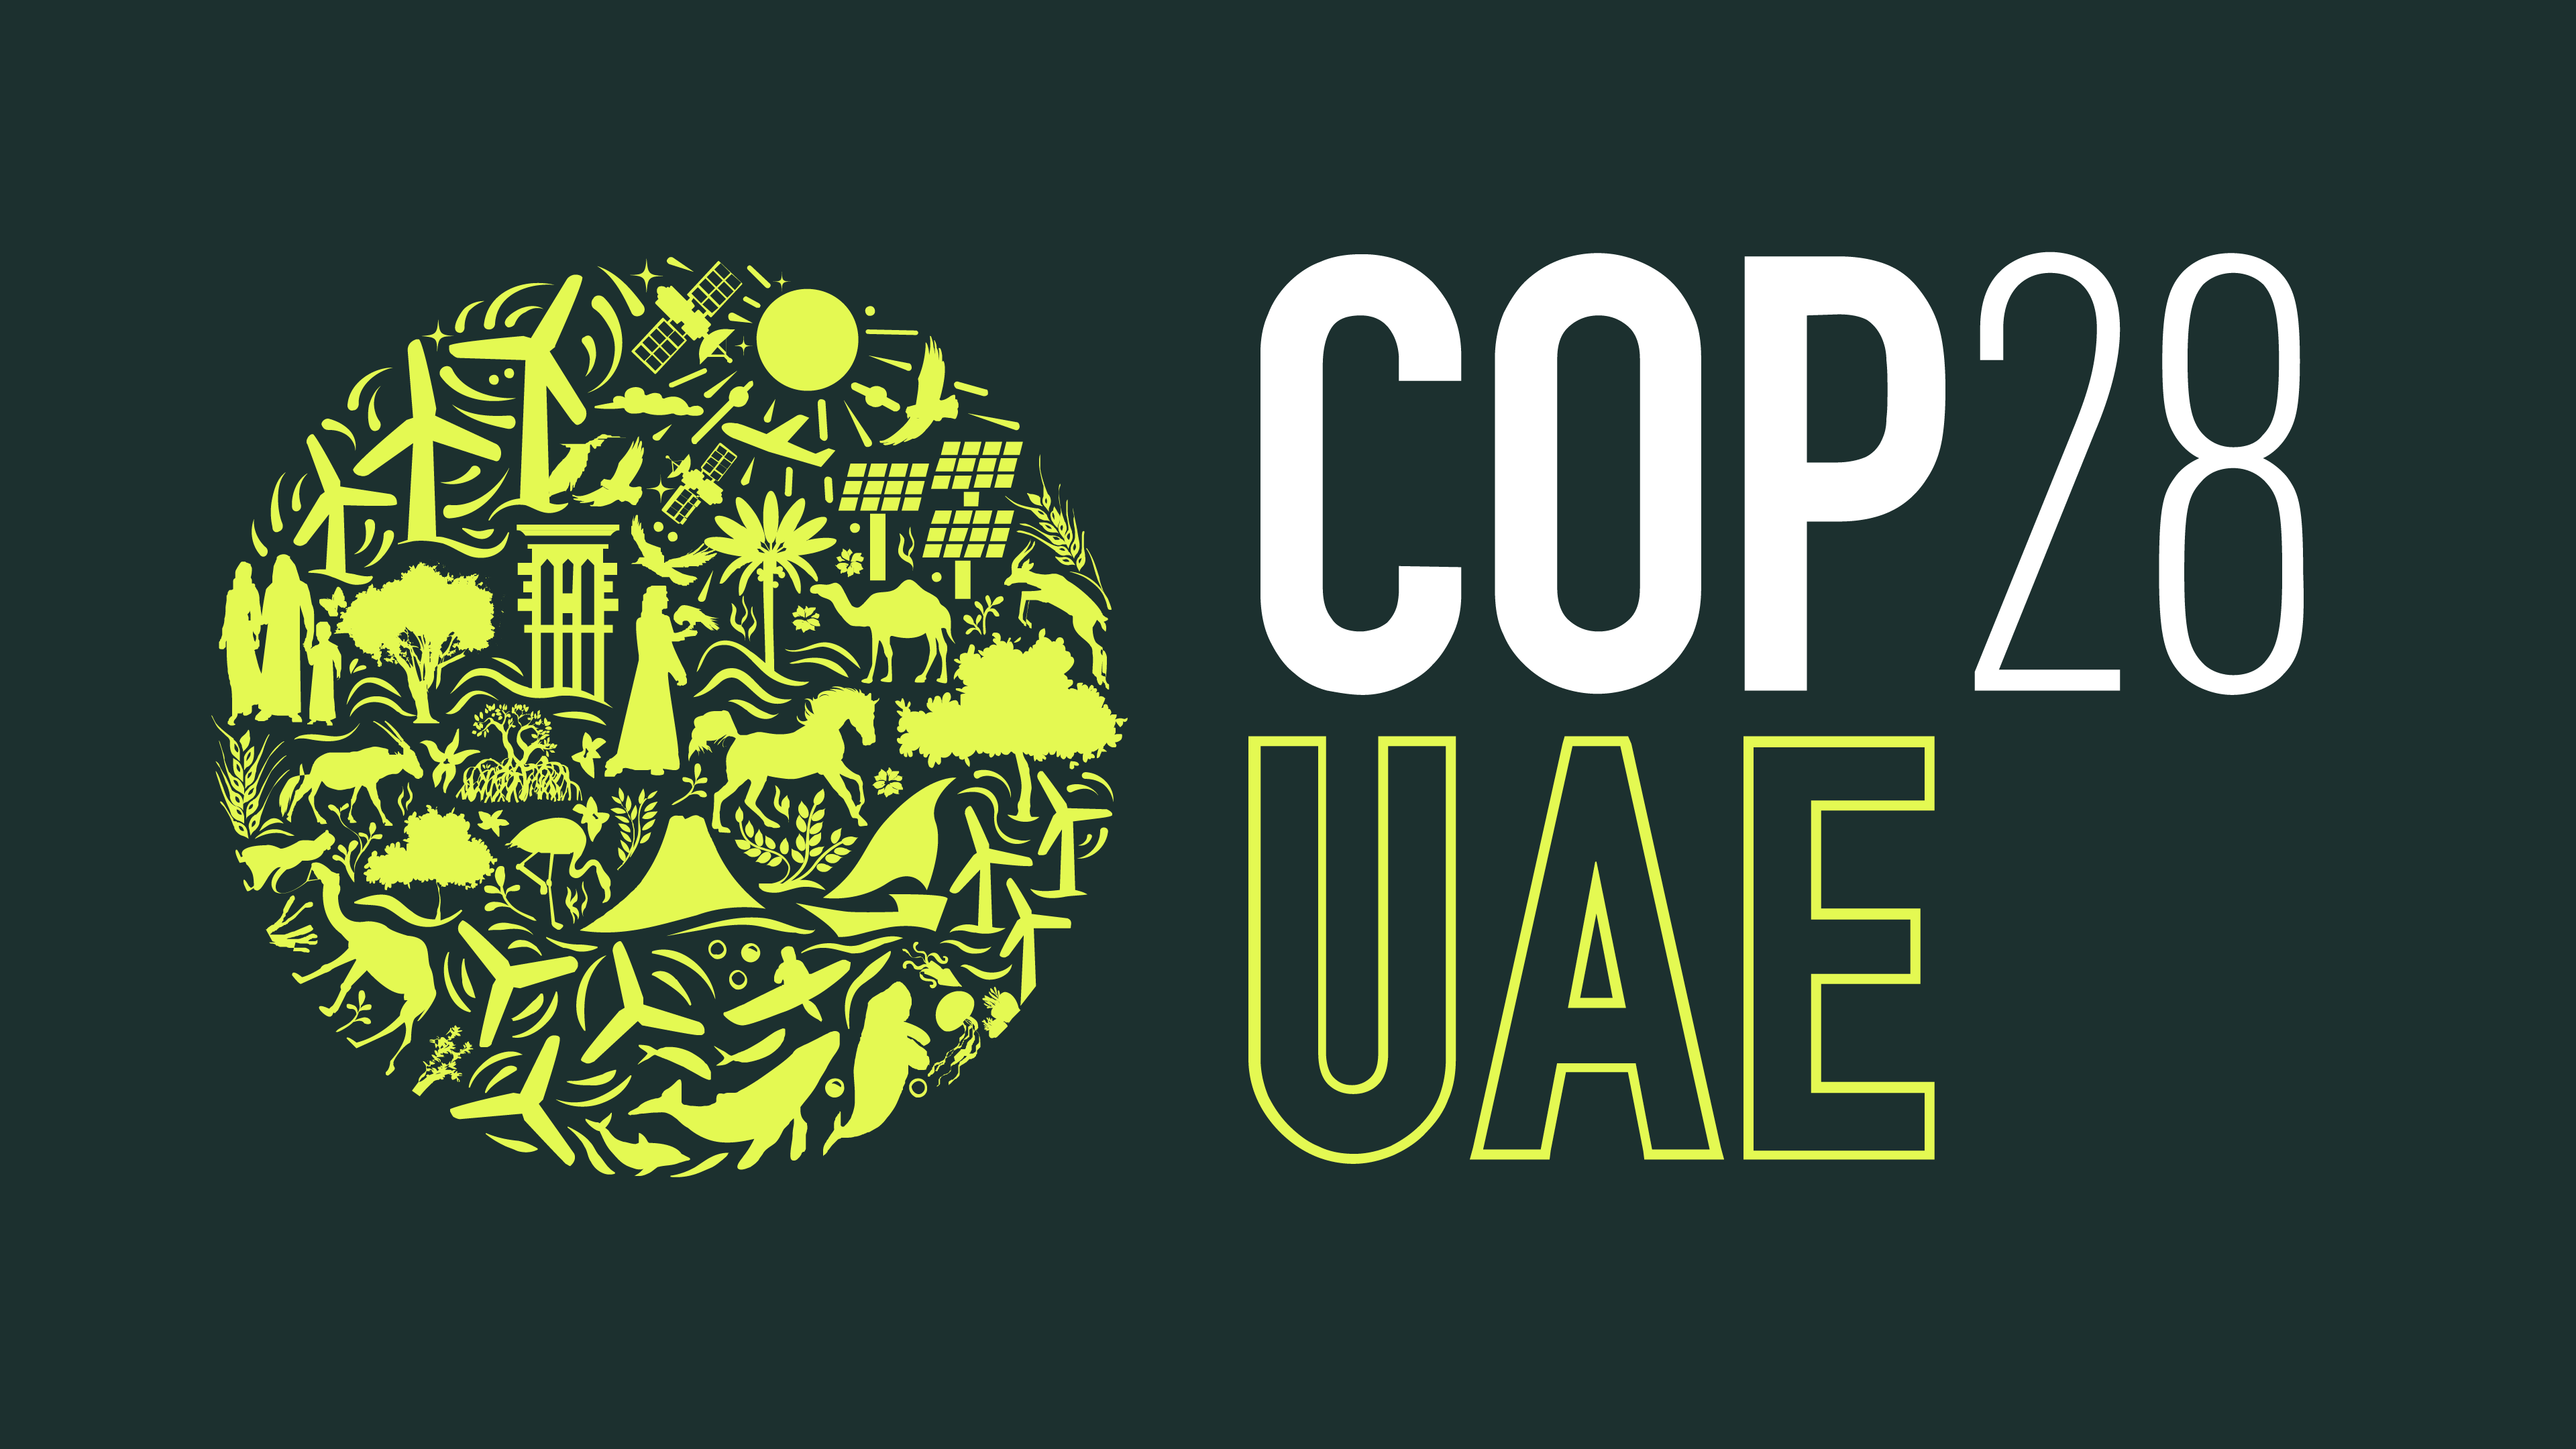 Ocean Pavilion program related to GEORGE at COP28